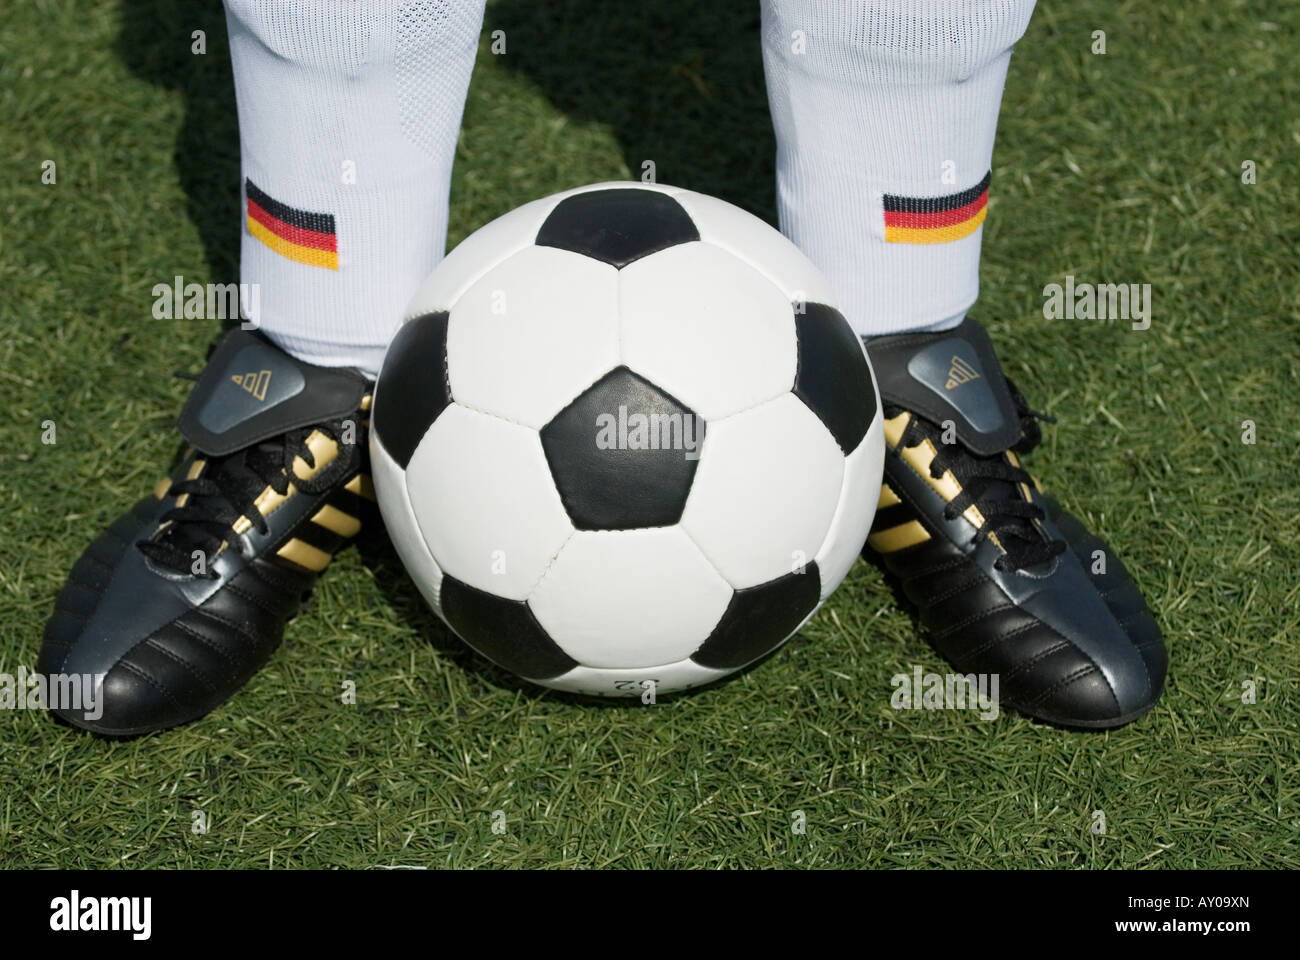 the feet of a german national football player and a vintage black and white football Stock Photo